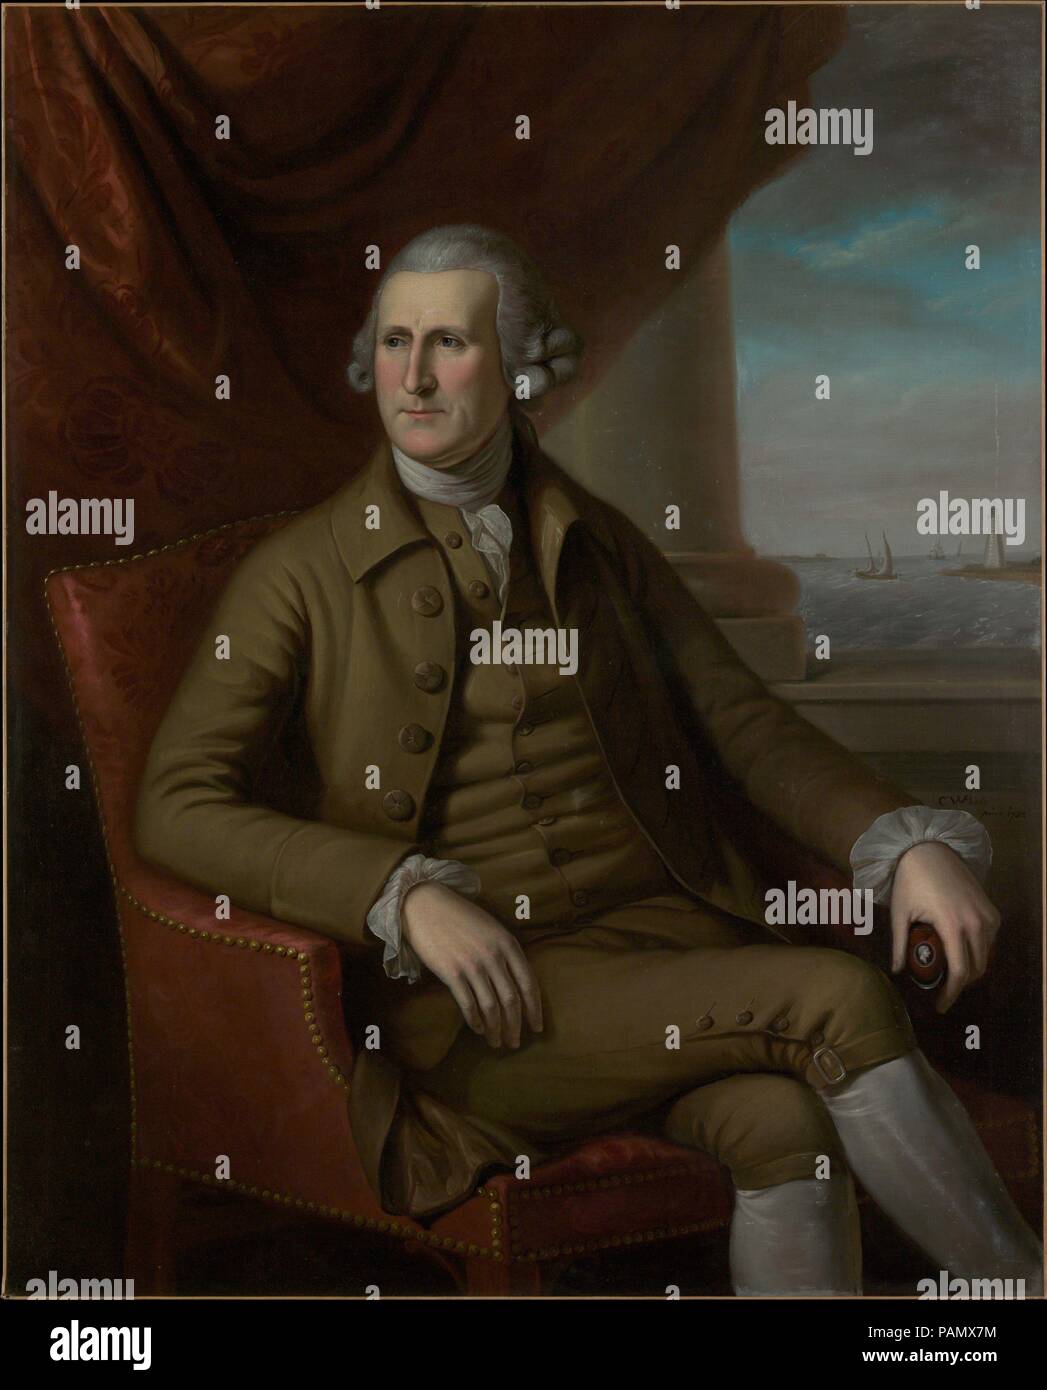 Thomas Willing. Artist: Charles Willson Peale (American, Chester, Maryland 1741-1827 Philadelphia, Pennsylvania). Dimensions: 49 1/2 x 39 3/4 in. (125.7 x 101 cm). Date: 1782.  In 1781, Thomas Willing (1731-1821) was elected head of the Bank of North America in order to raise funds for the Revolutionary cause. This portrait apparently commemorates that appointment. To the sitter's left is a view of the lighthouse in Cape Henlopen, Delaware, for the building of which he had contributed funds. Willing holds an oval Wedgwood snuffbox bearing the profile of his close friend George Washington. Muse Stock Photo